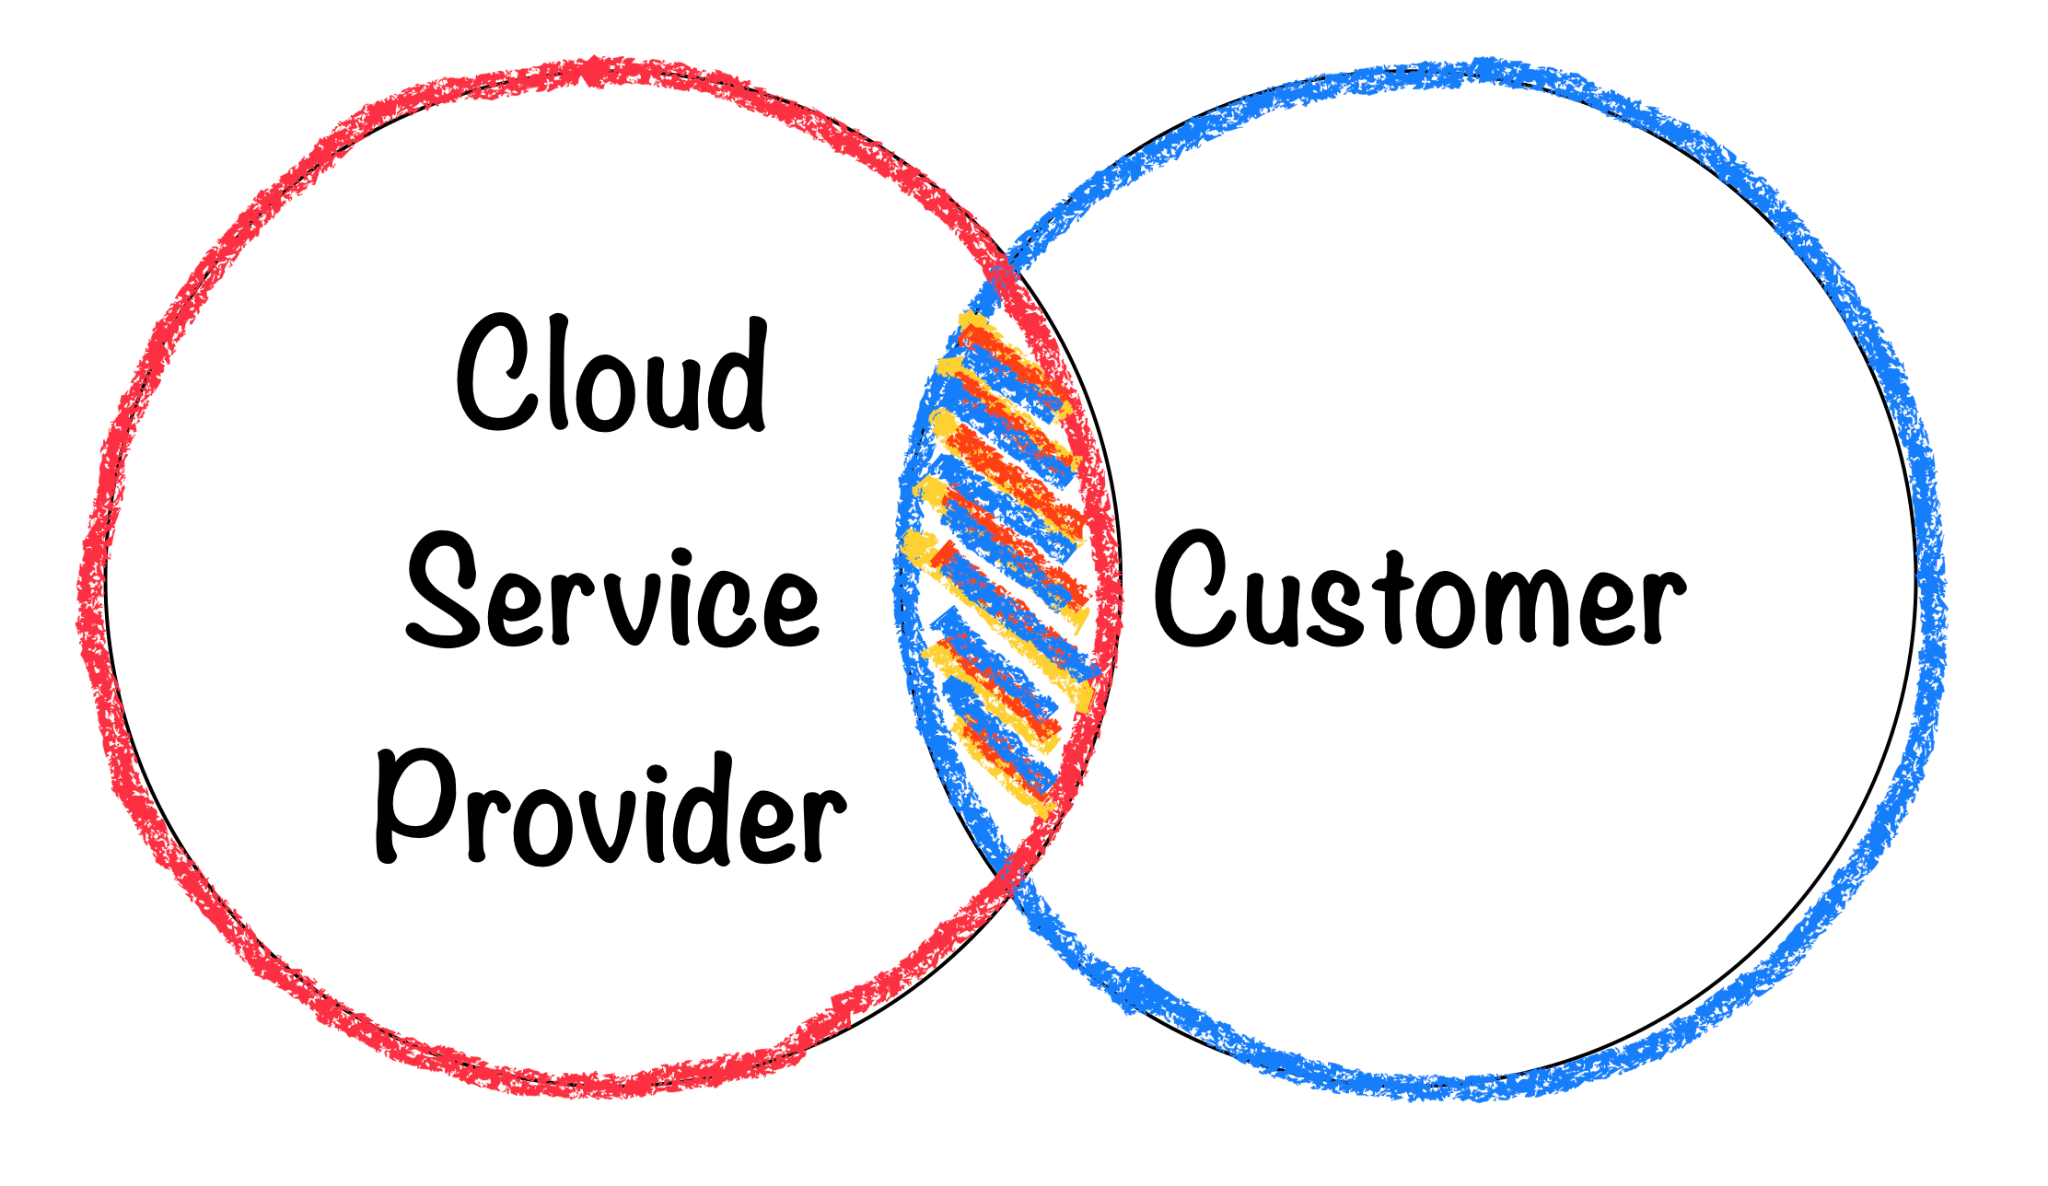 Fig.3: Shared security responsibility between the Cloud Service providers and the Customers